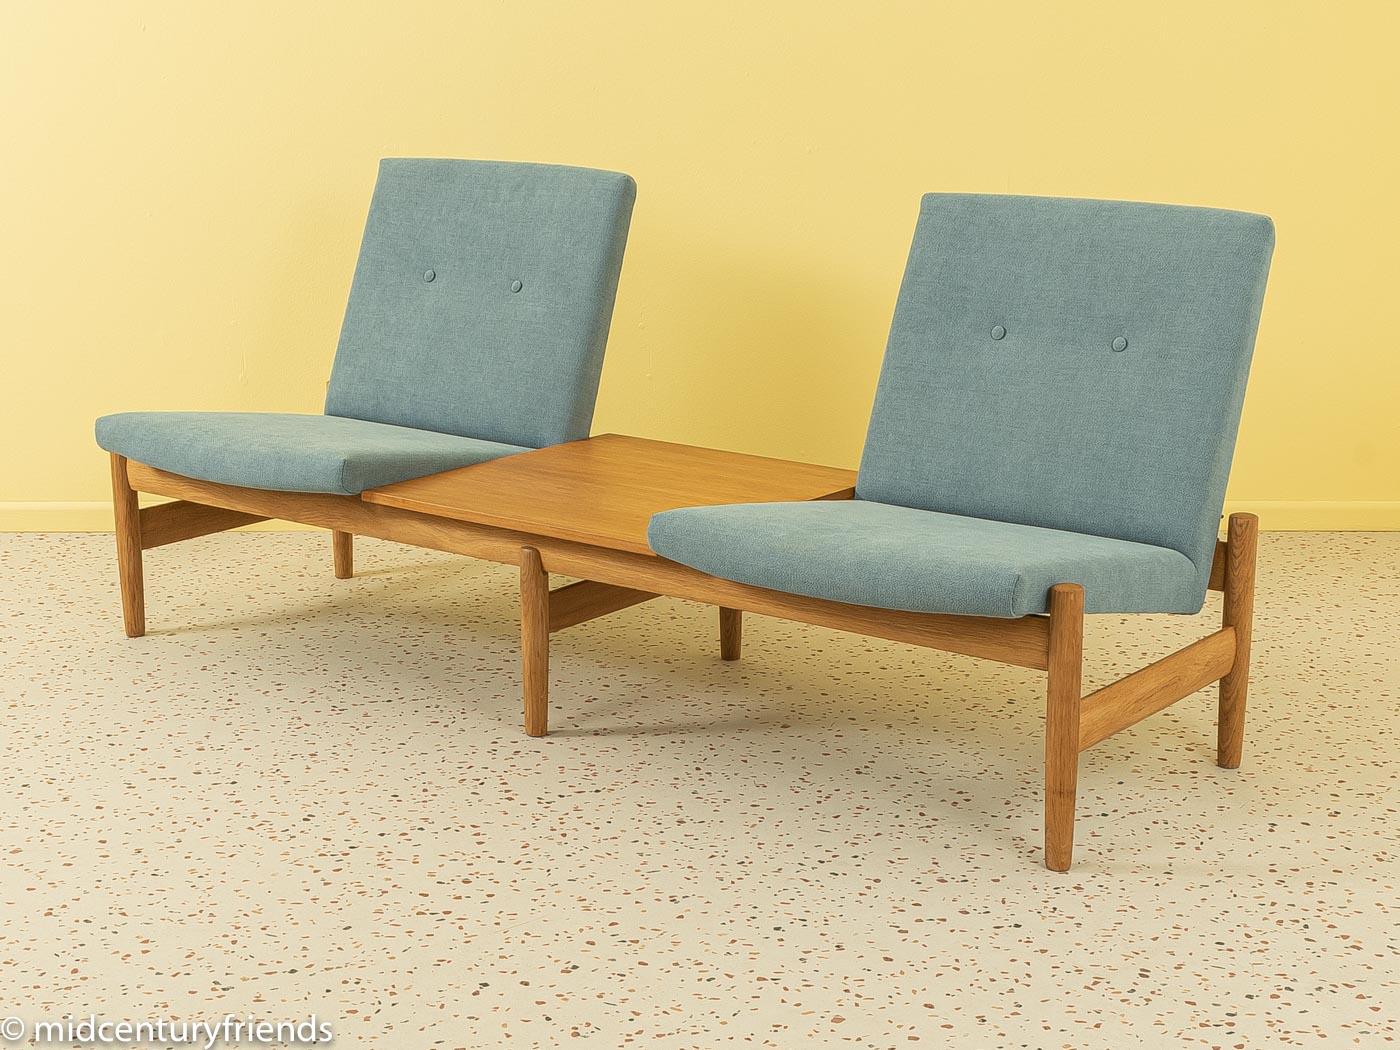 Exclusive modular sofa from the 1960s by Gunnar Sørlie for Karl Sørlie & Sønner, Sarpsborg. Saga model with high quality solid oak frame. The sofa has been reupholstered, covered with a high-quality fabric in smoky blue and has received a new table